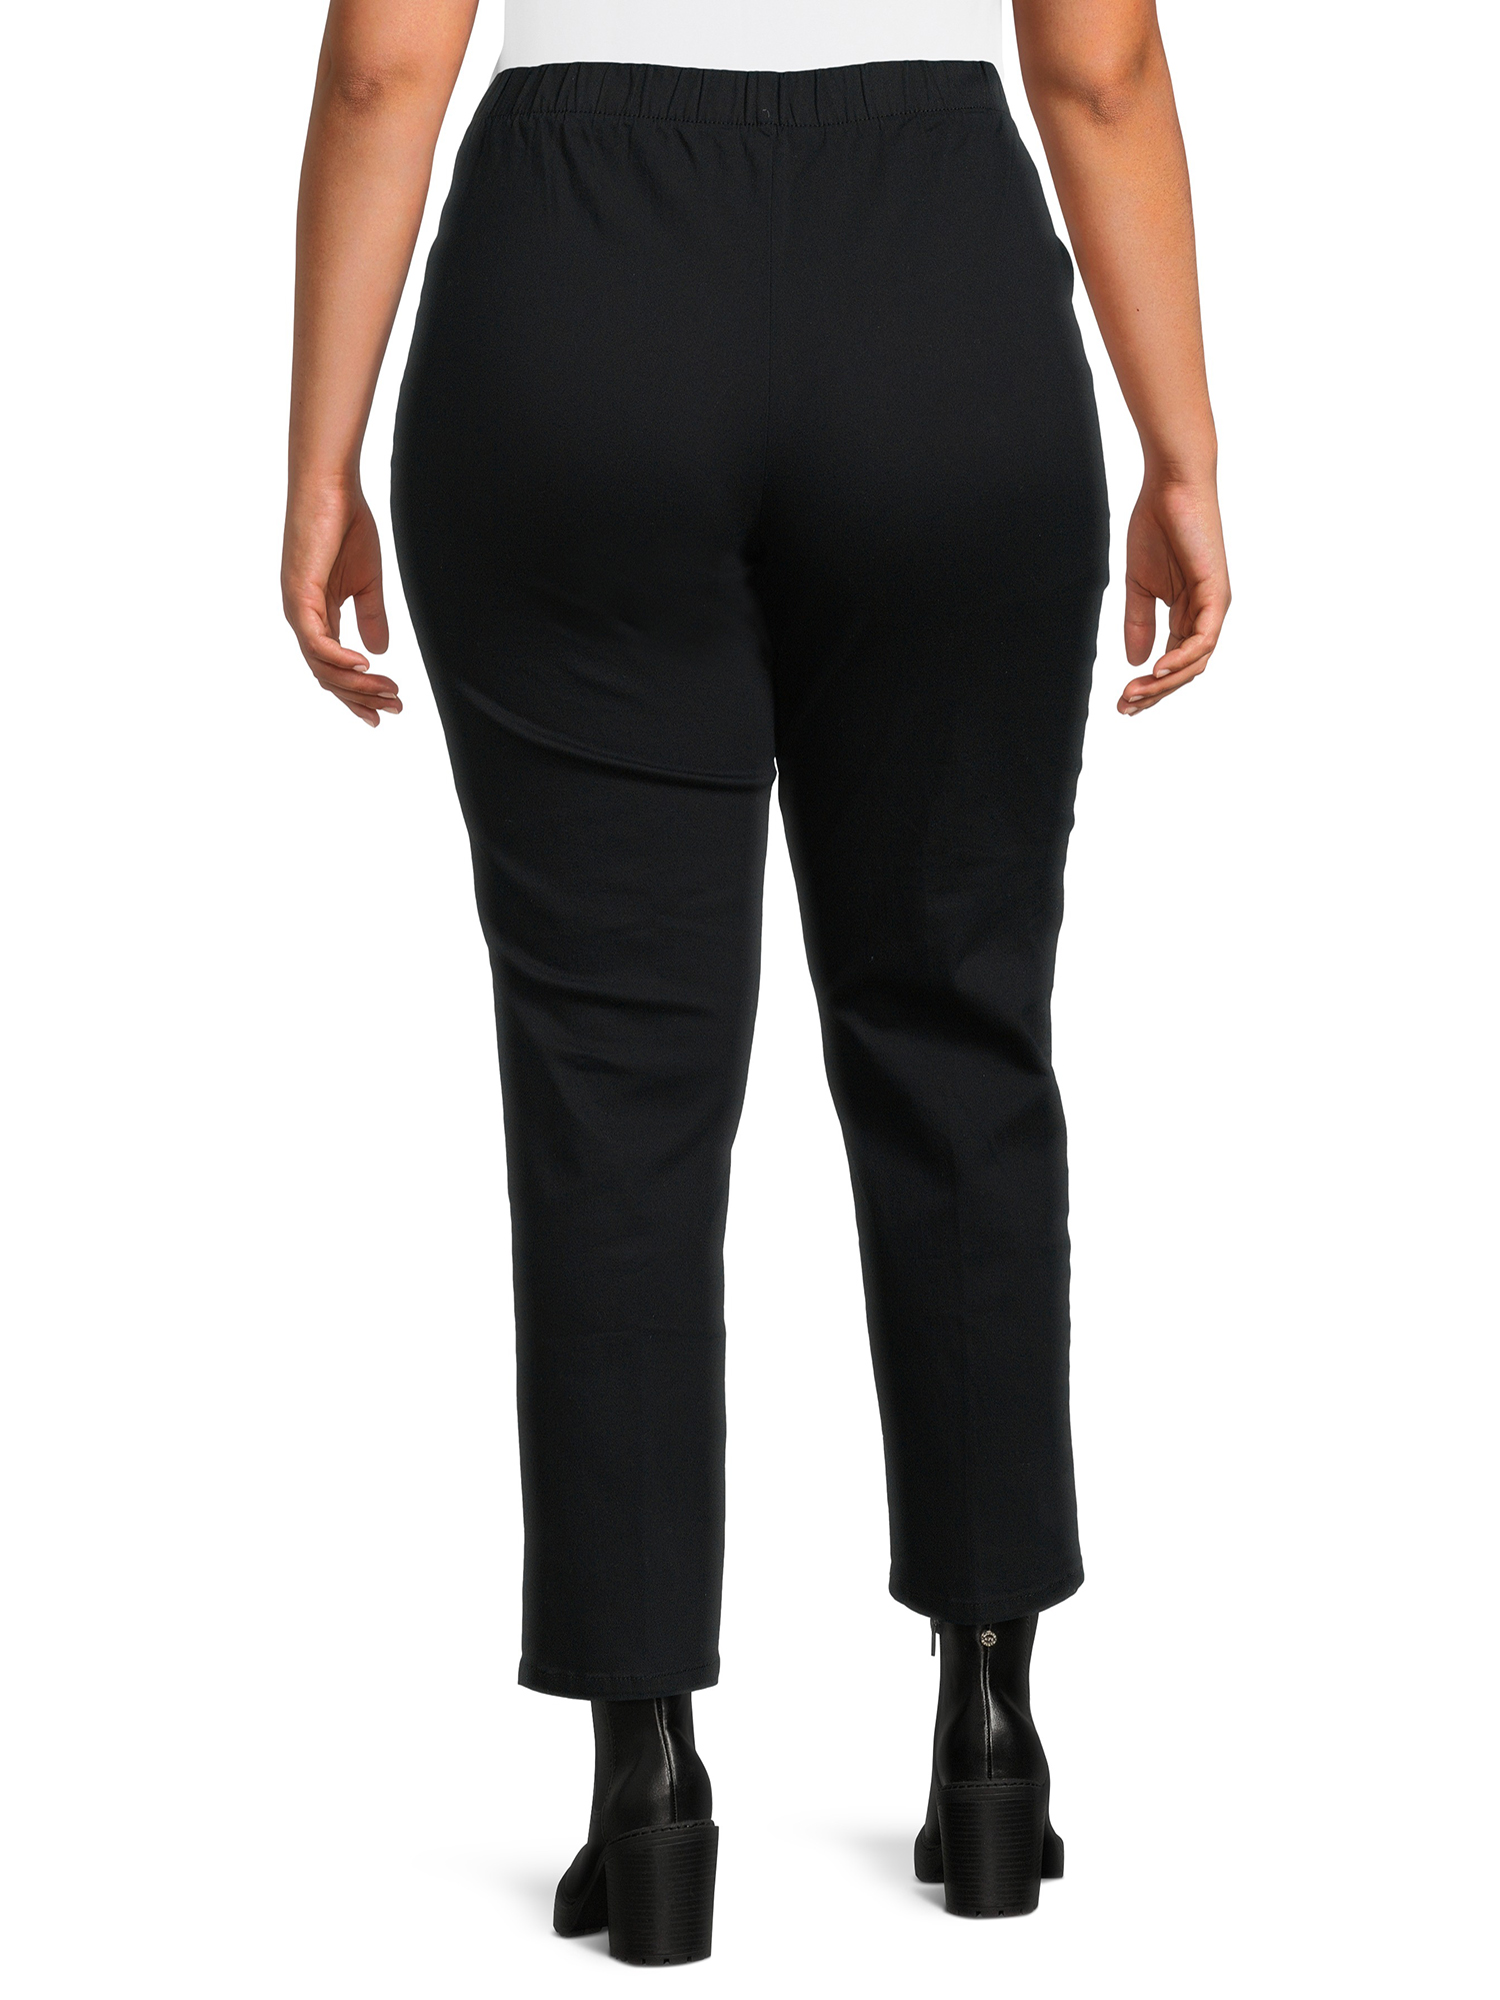 Just My Size Women's Plus 2 Pocket Pull-On Pant - image 3 of 8